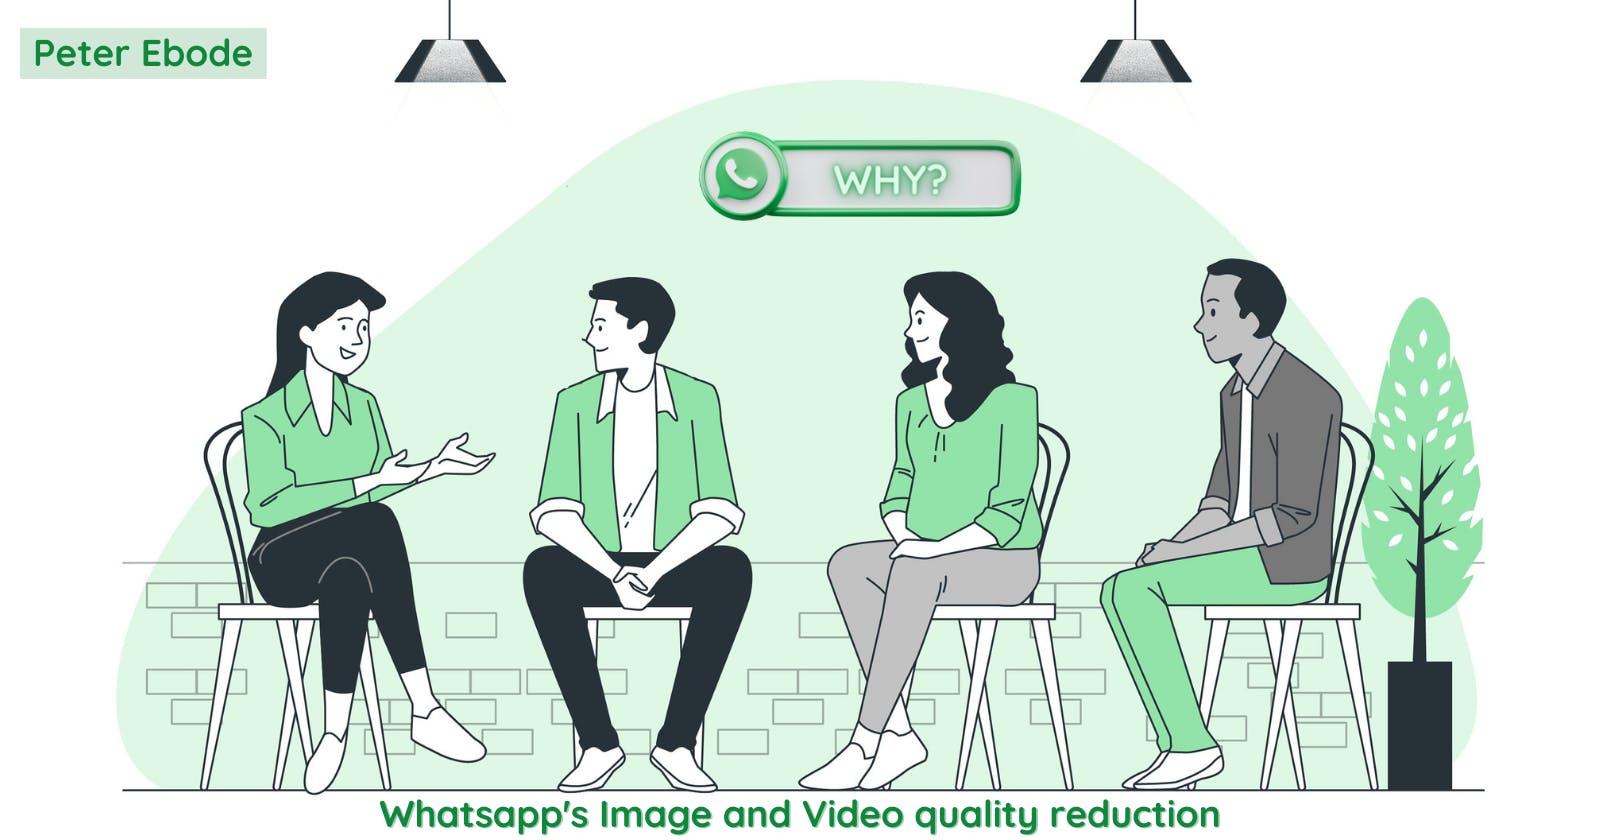 Whatsapp's Image and Video quality reduction